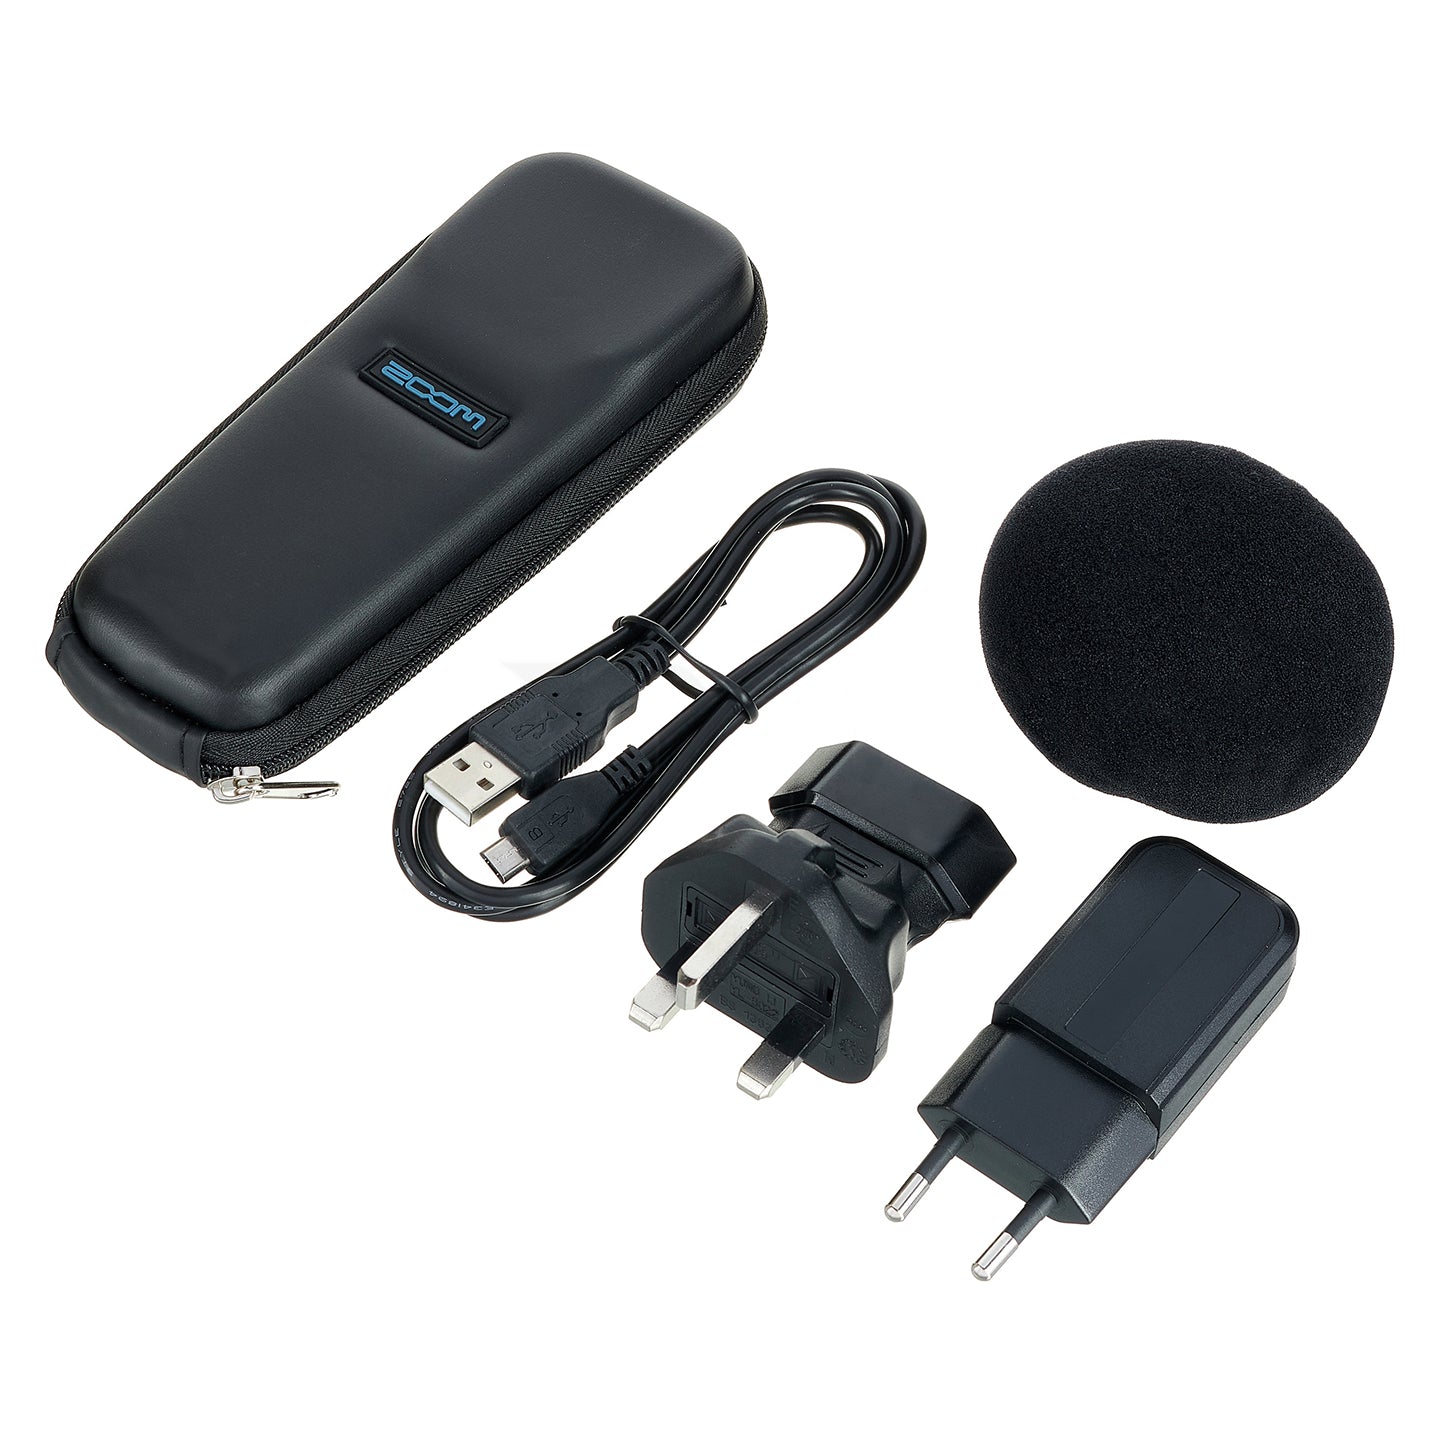 Zoom SPH-1N Accessory Package for H1n Handy Recorder (Padded Shell Case, Foam Windscreen, USB Cable, AC Power Adapter)